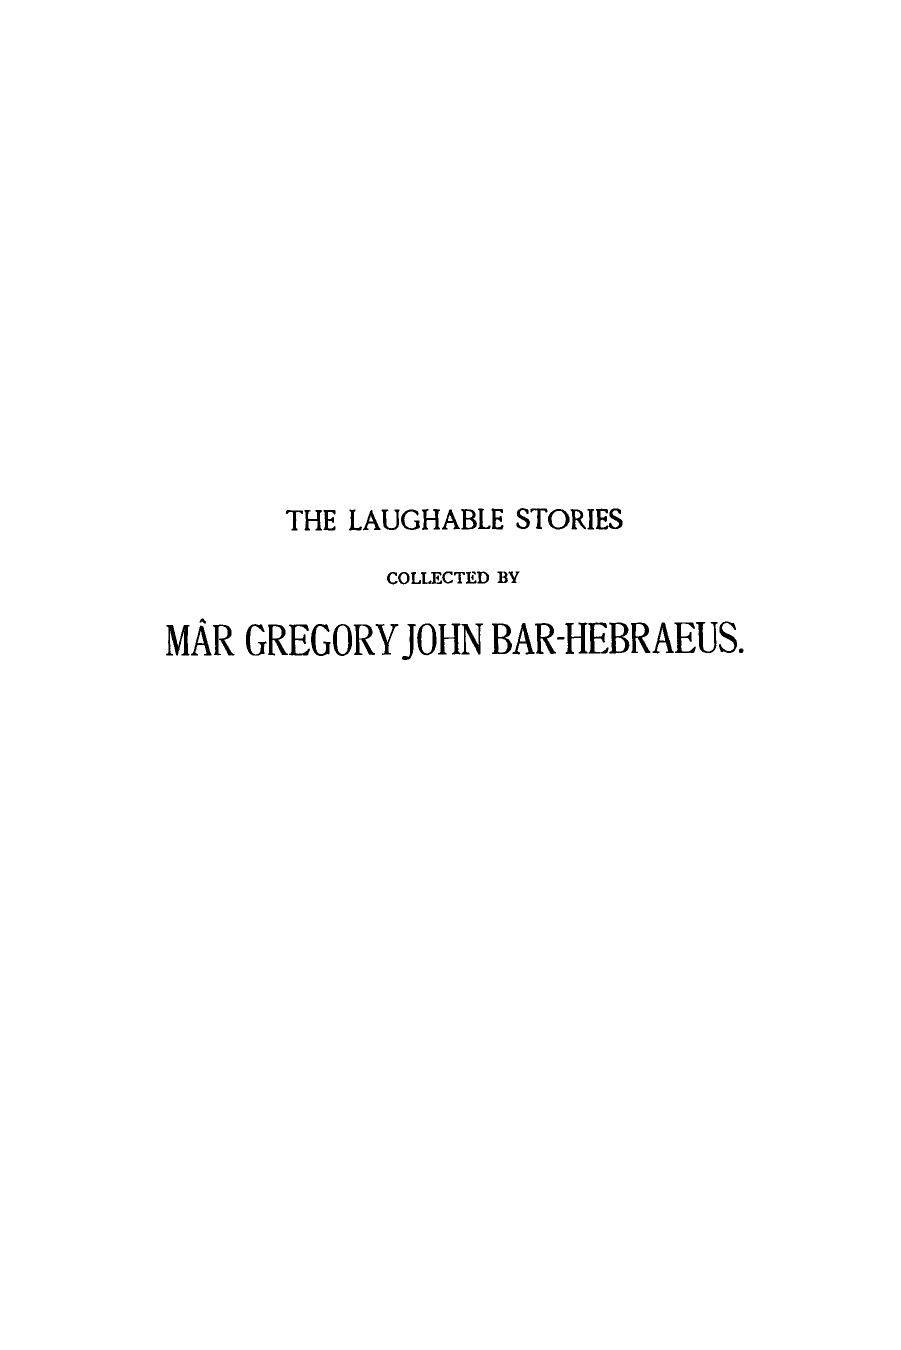 The Laughable Stories Collected by Mar Gregory John Barhebraeus by Gregory Bar-Hebraeus